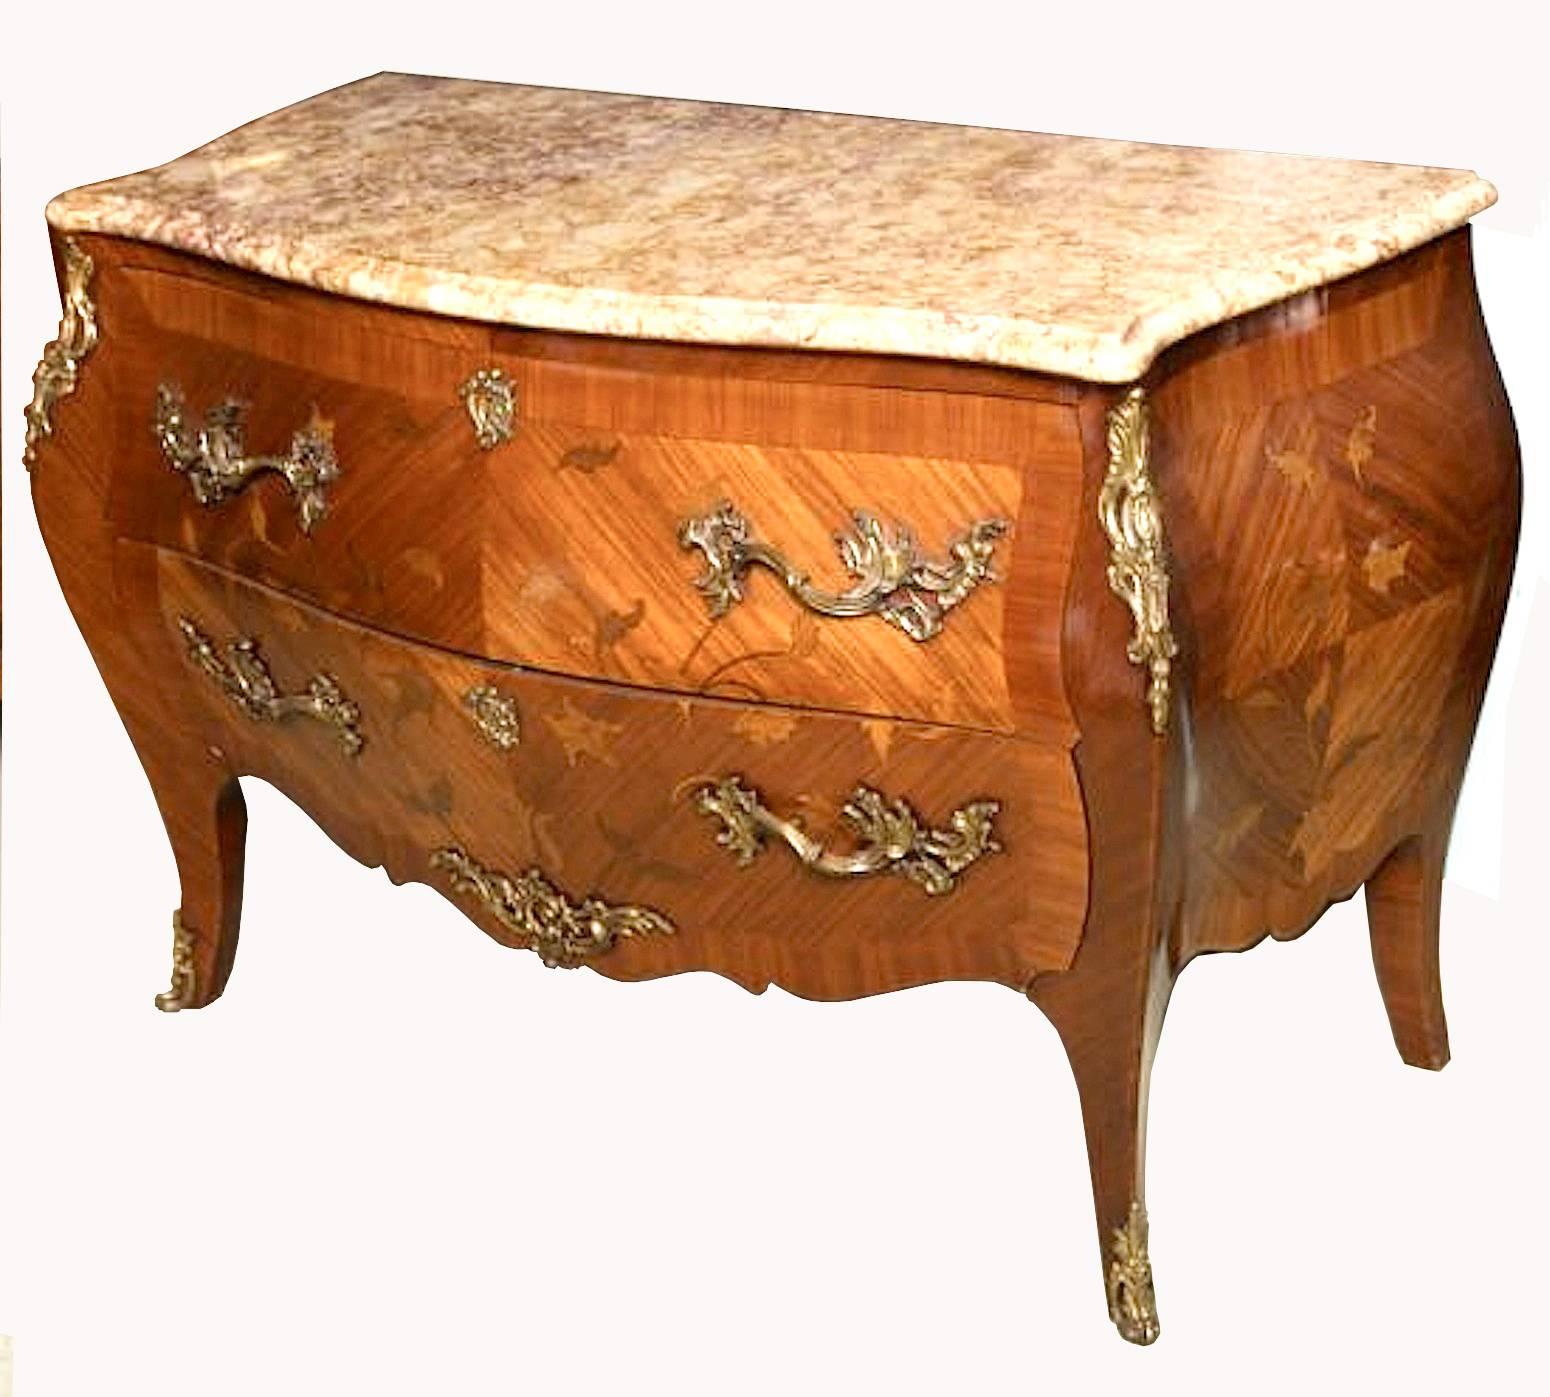 A very fine Connoisseur style 19th century French large commode with ormolu mounts in kingwood, rosewood and floral marquetry Bombe Chest of Louis XV style, second half of the 19th century of serpentine form, the serpentine shape marble-top above